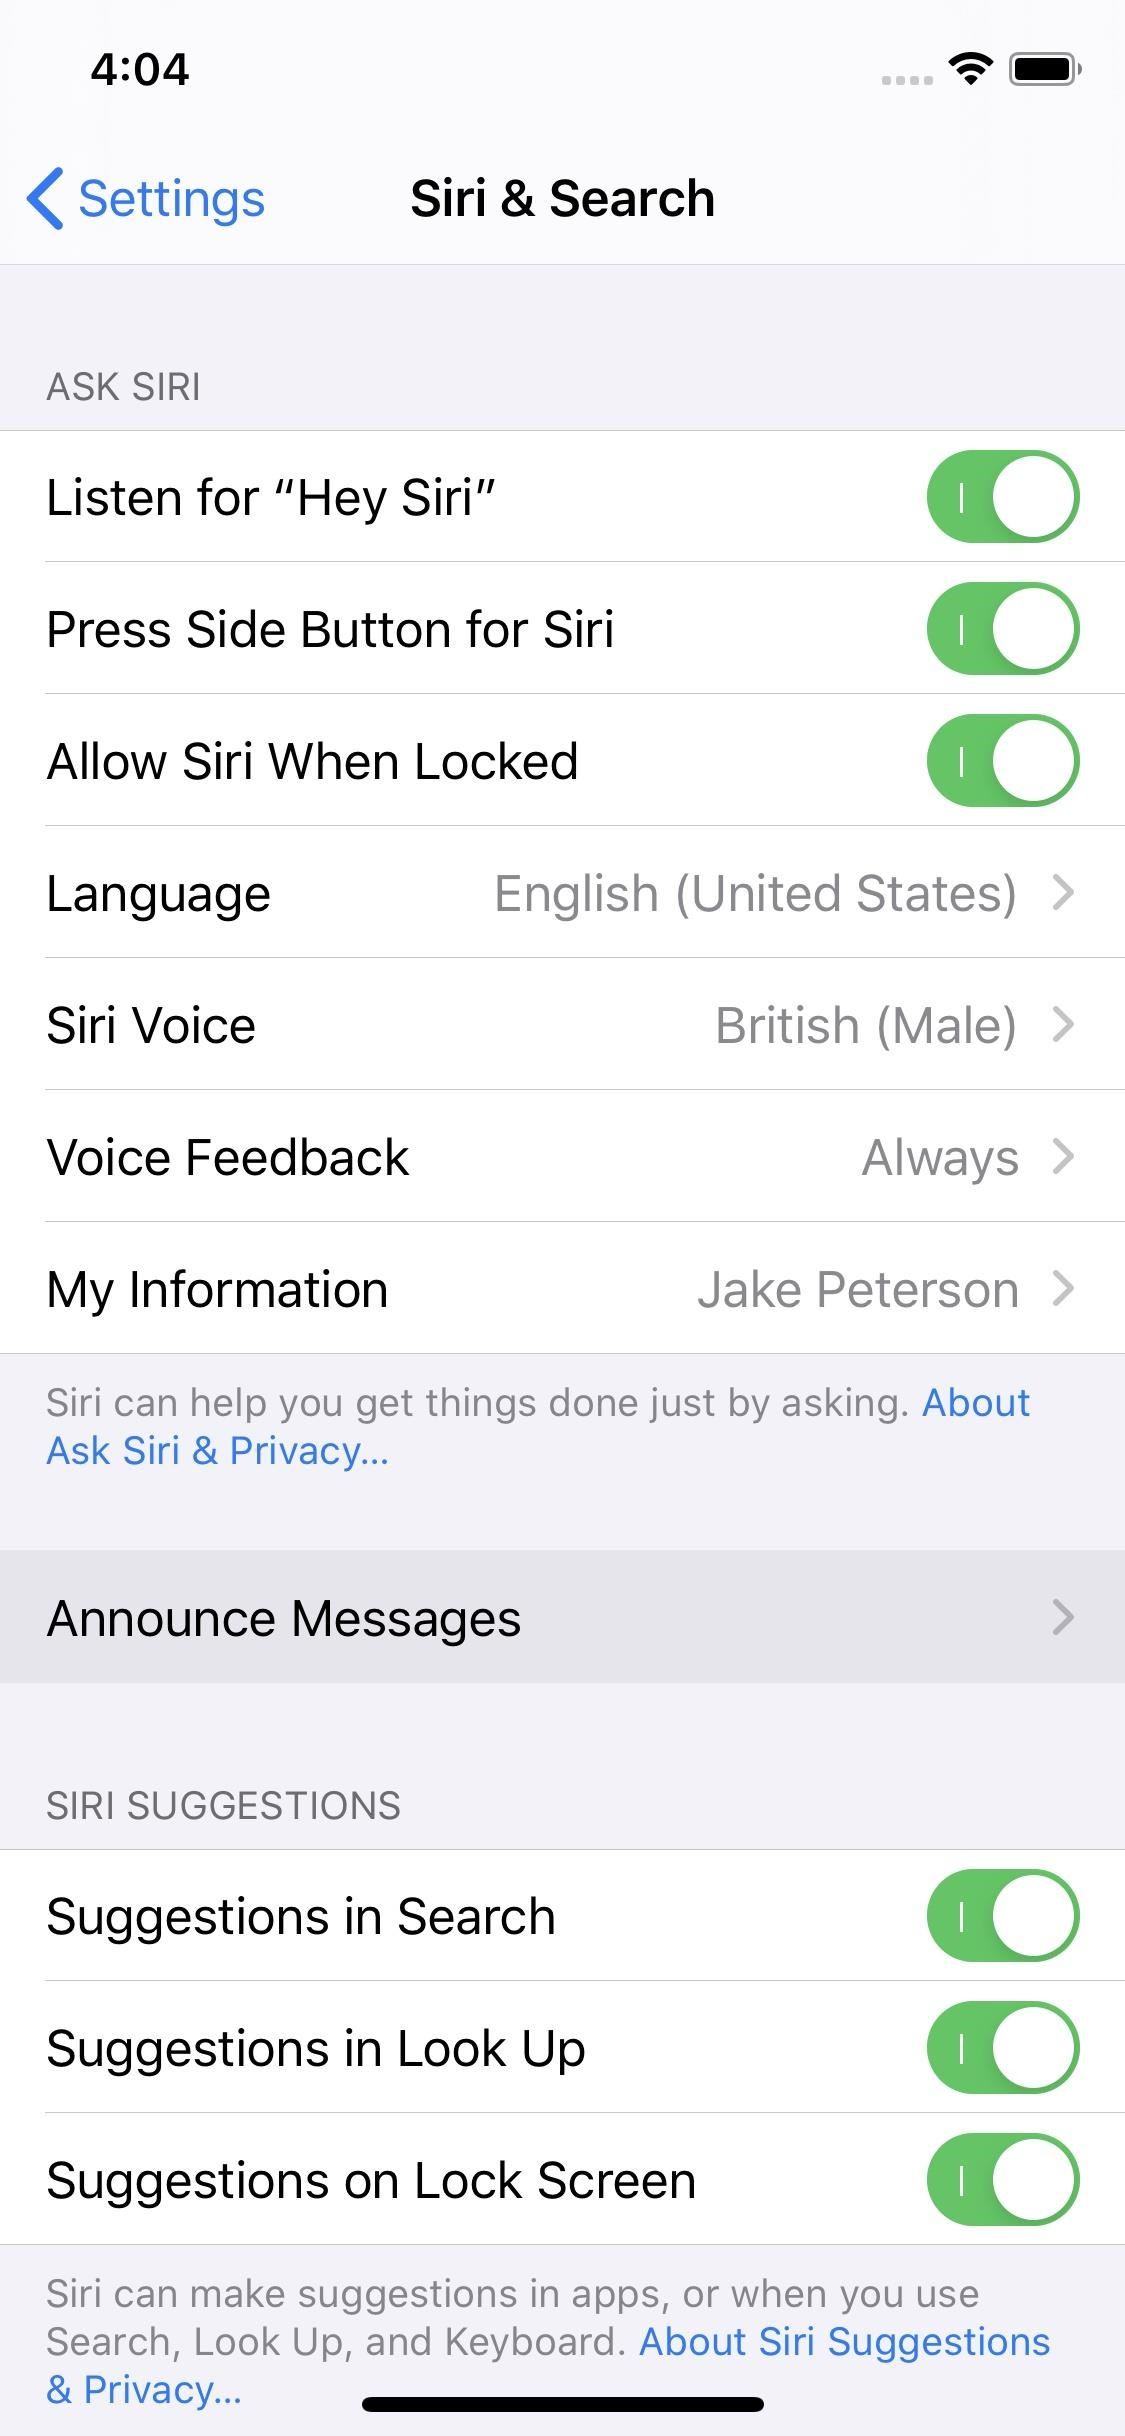 Announce Messages with Siri Not Working on iOS 13.2? Here's the Fix